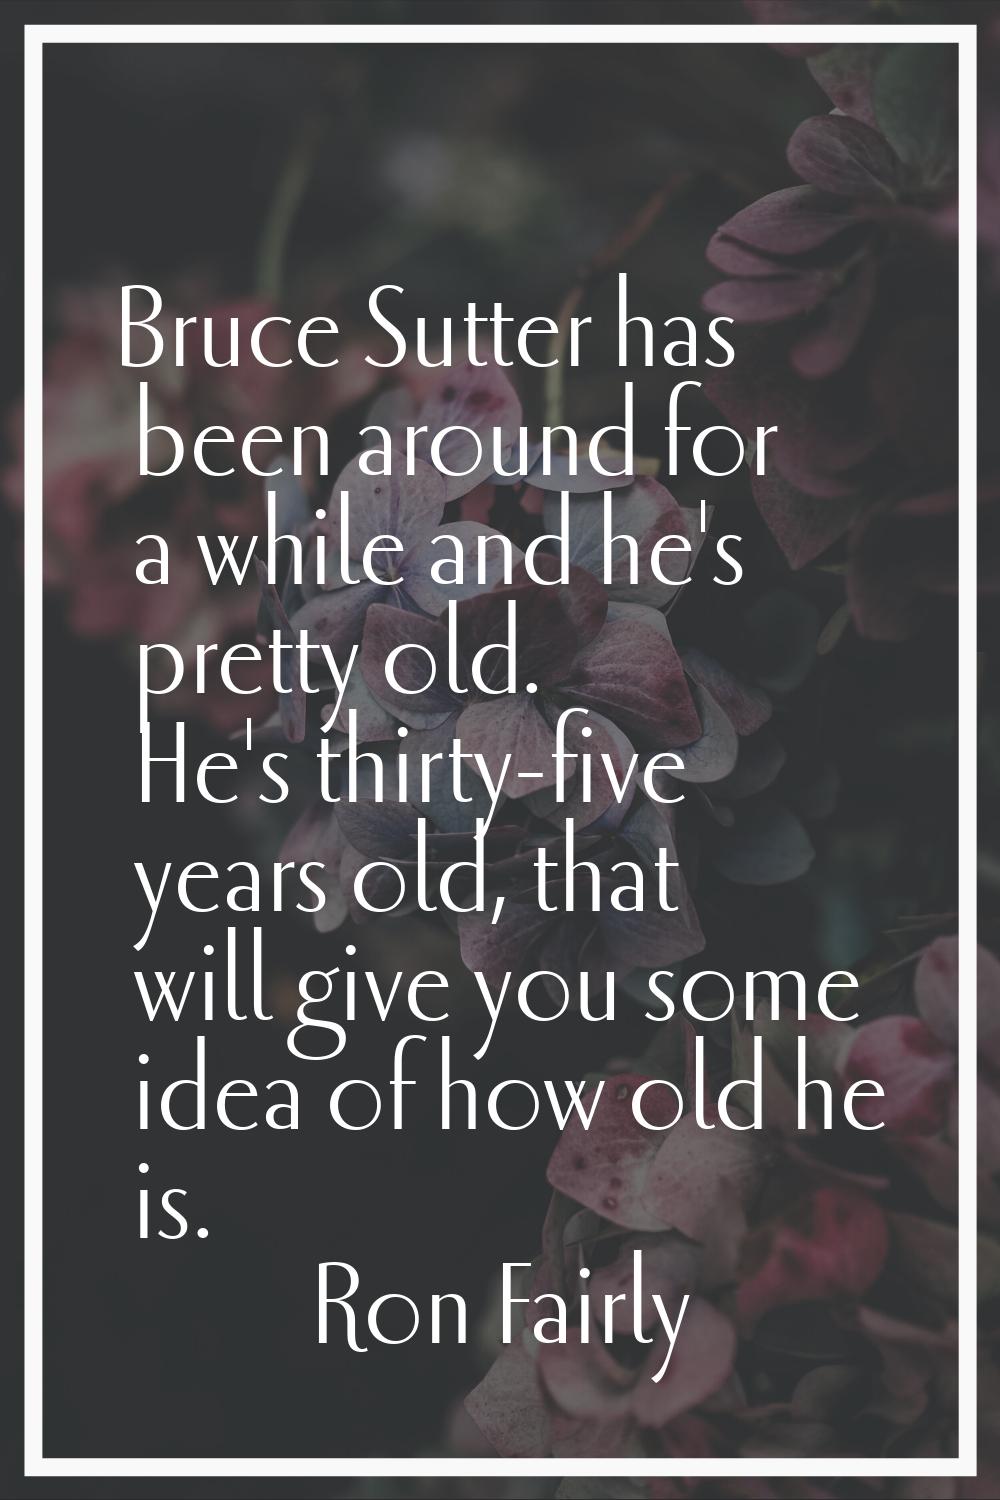 Bruce Sutter has been around for a while and he's pretty old. He's thirty-five years old, that will